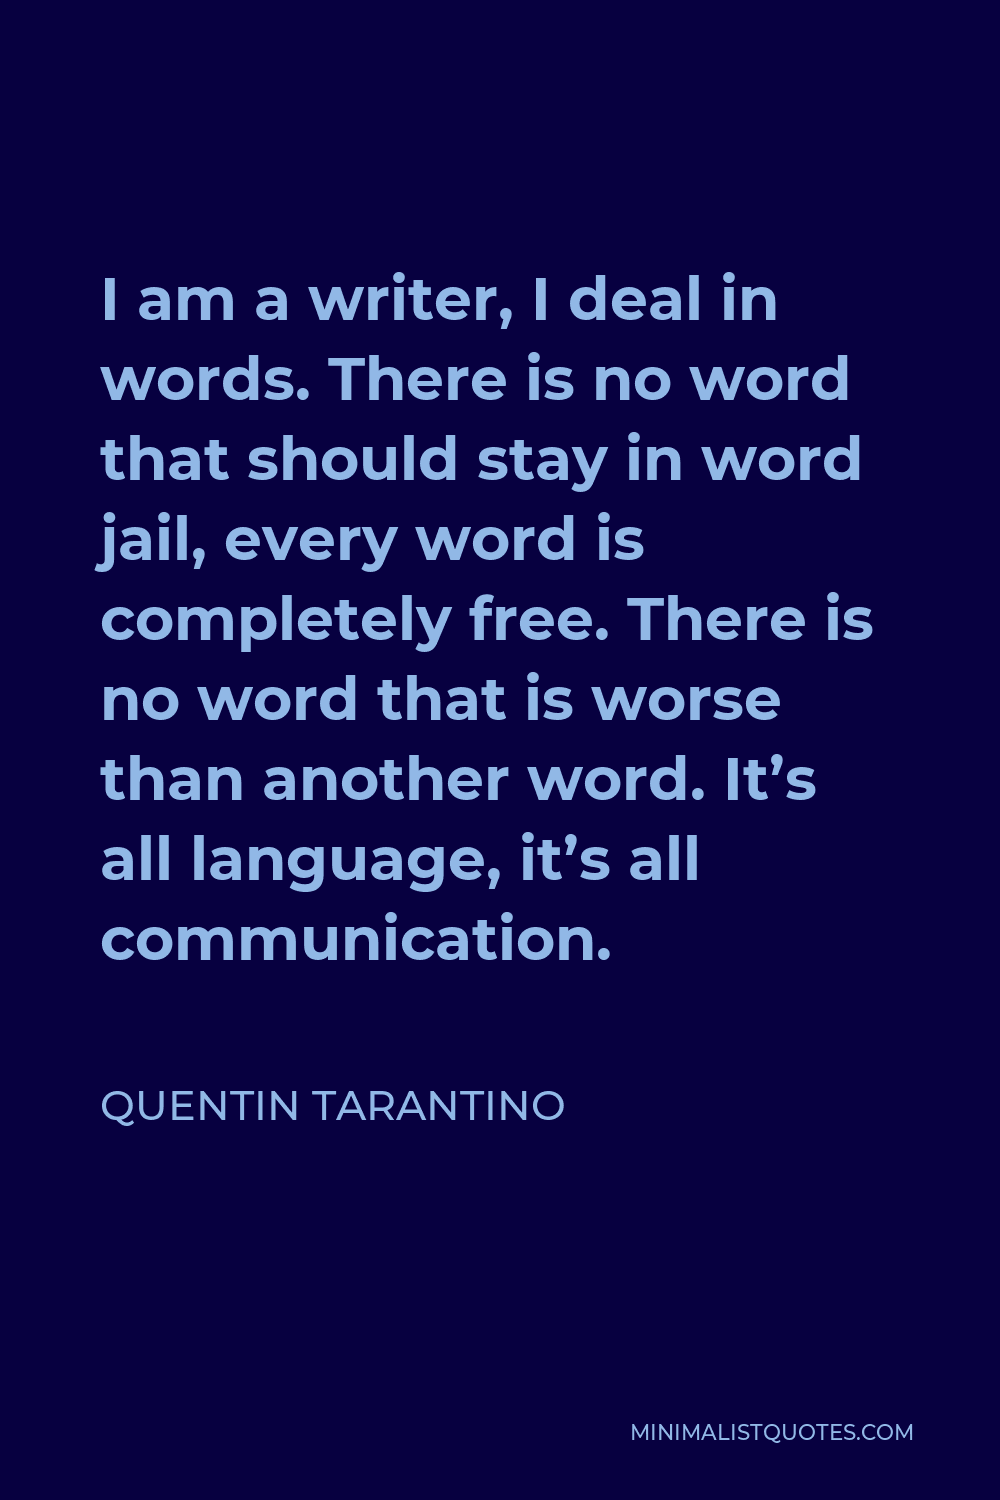 Quentin Tarantino Quote - I am a writer, I deal in words. There is no word that should stay in word jail, every word is completely free. There is no word that is worse than another word. It’s all language, it’s all communication.